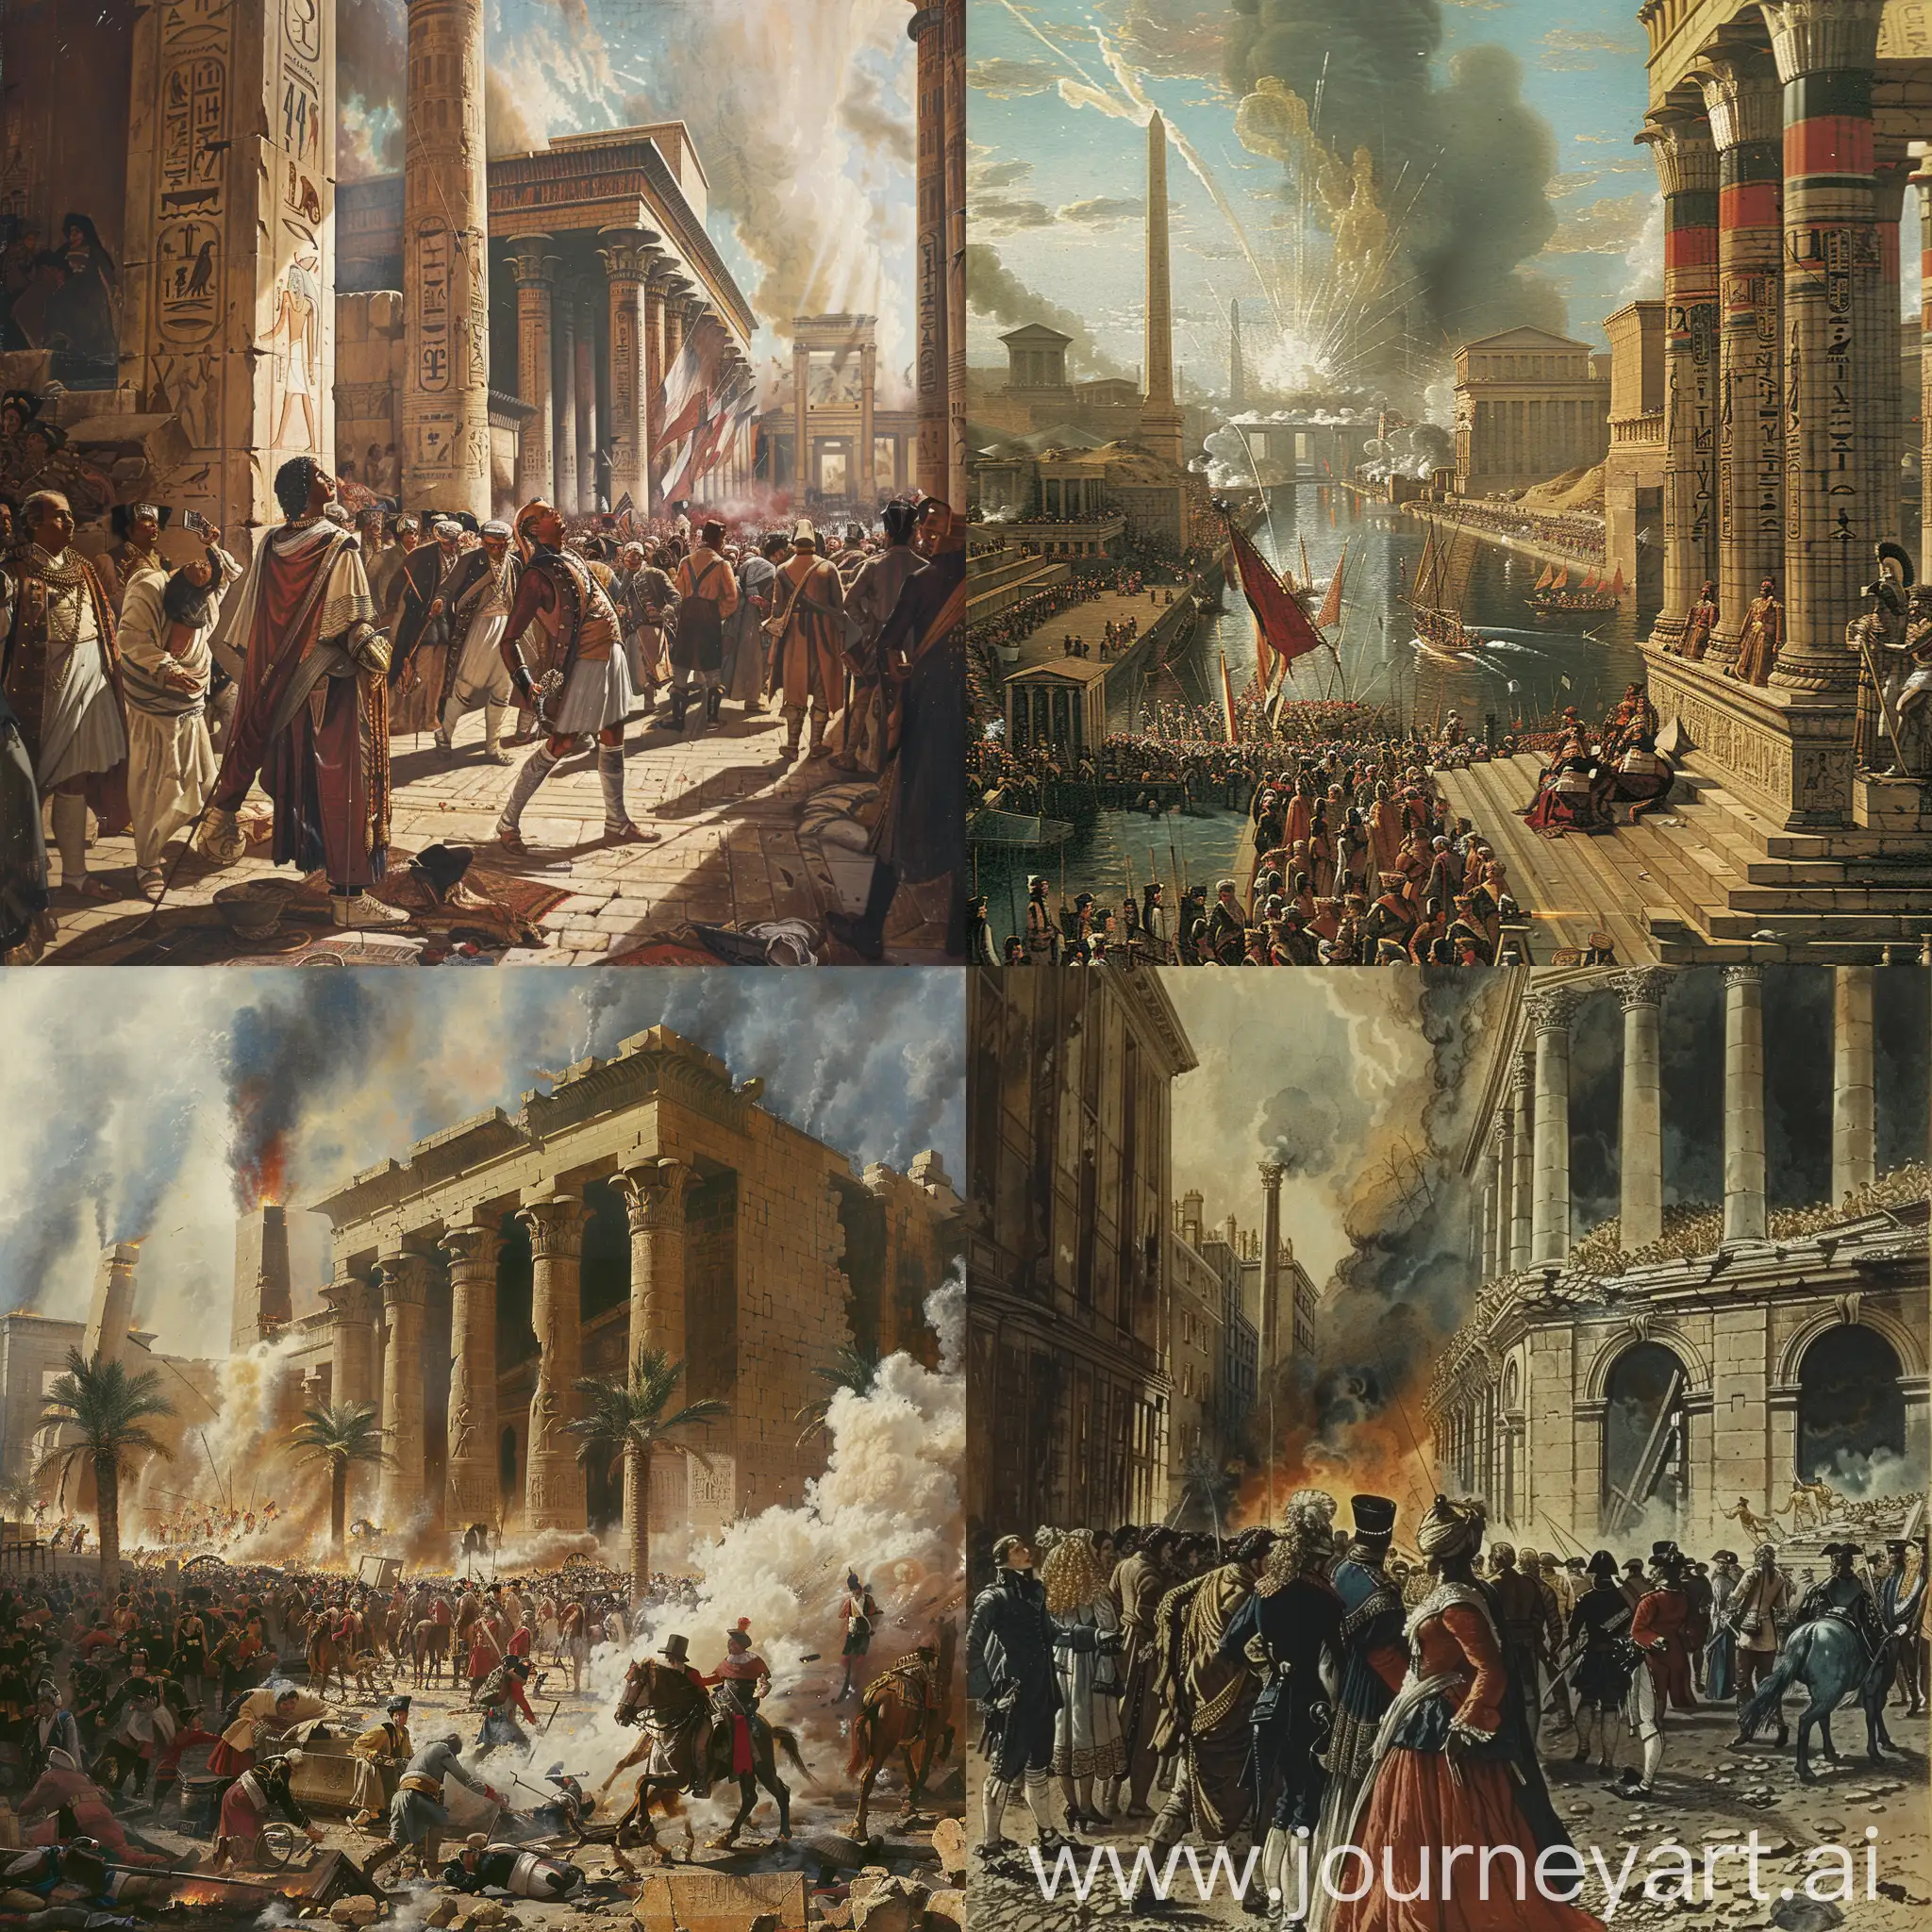 While Egyptian society remained stagnant, Europe was witnessing the French Revolution of 1789, an event that ushered in a new era.
